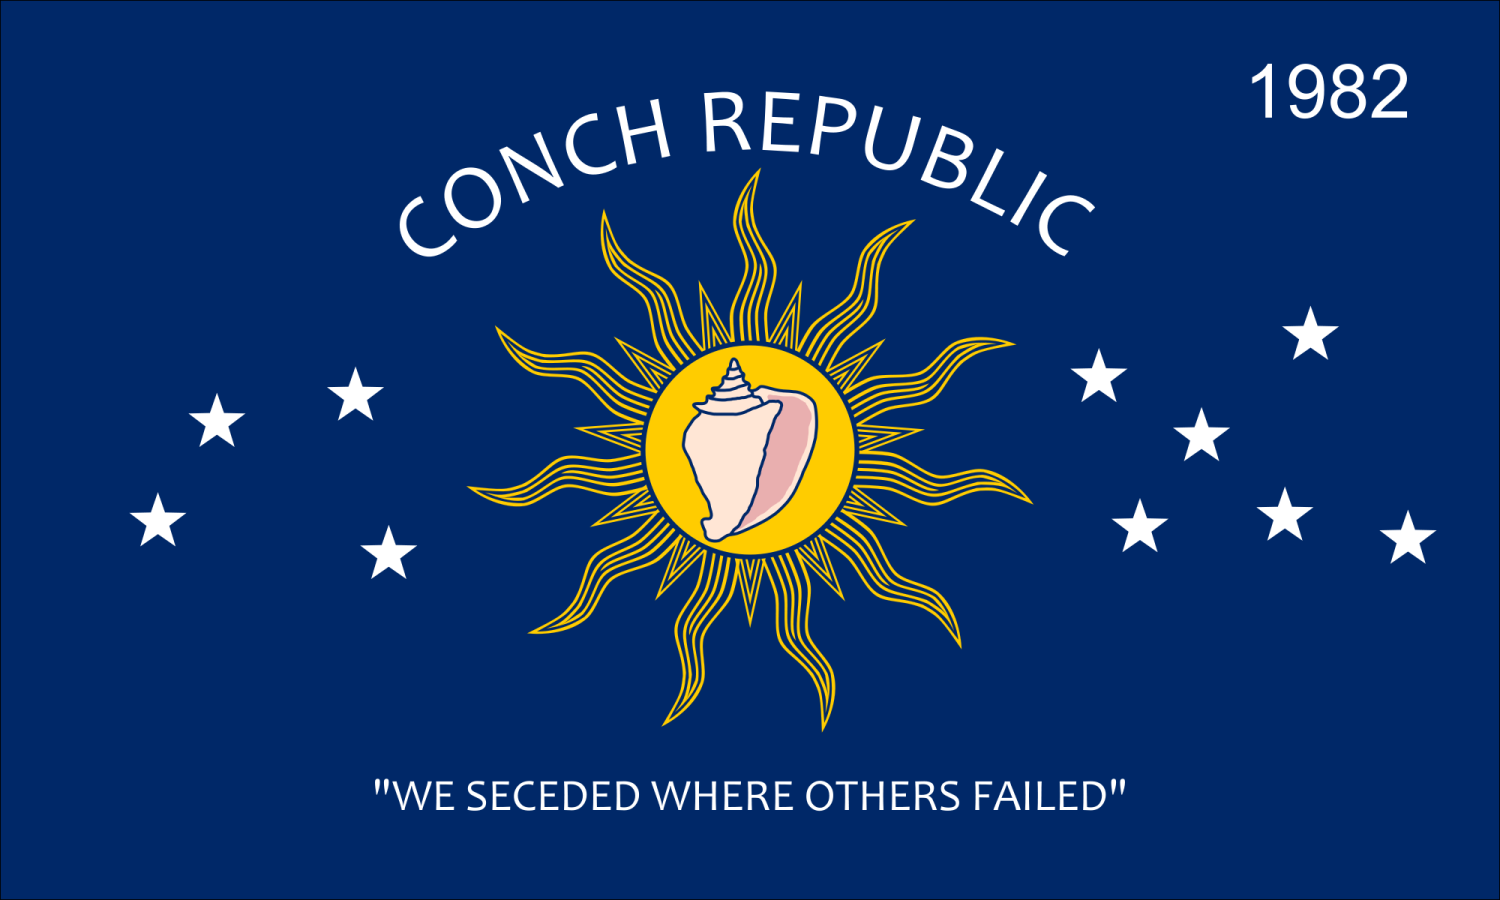 Report from the Florida Zone The Conch Republic